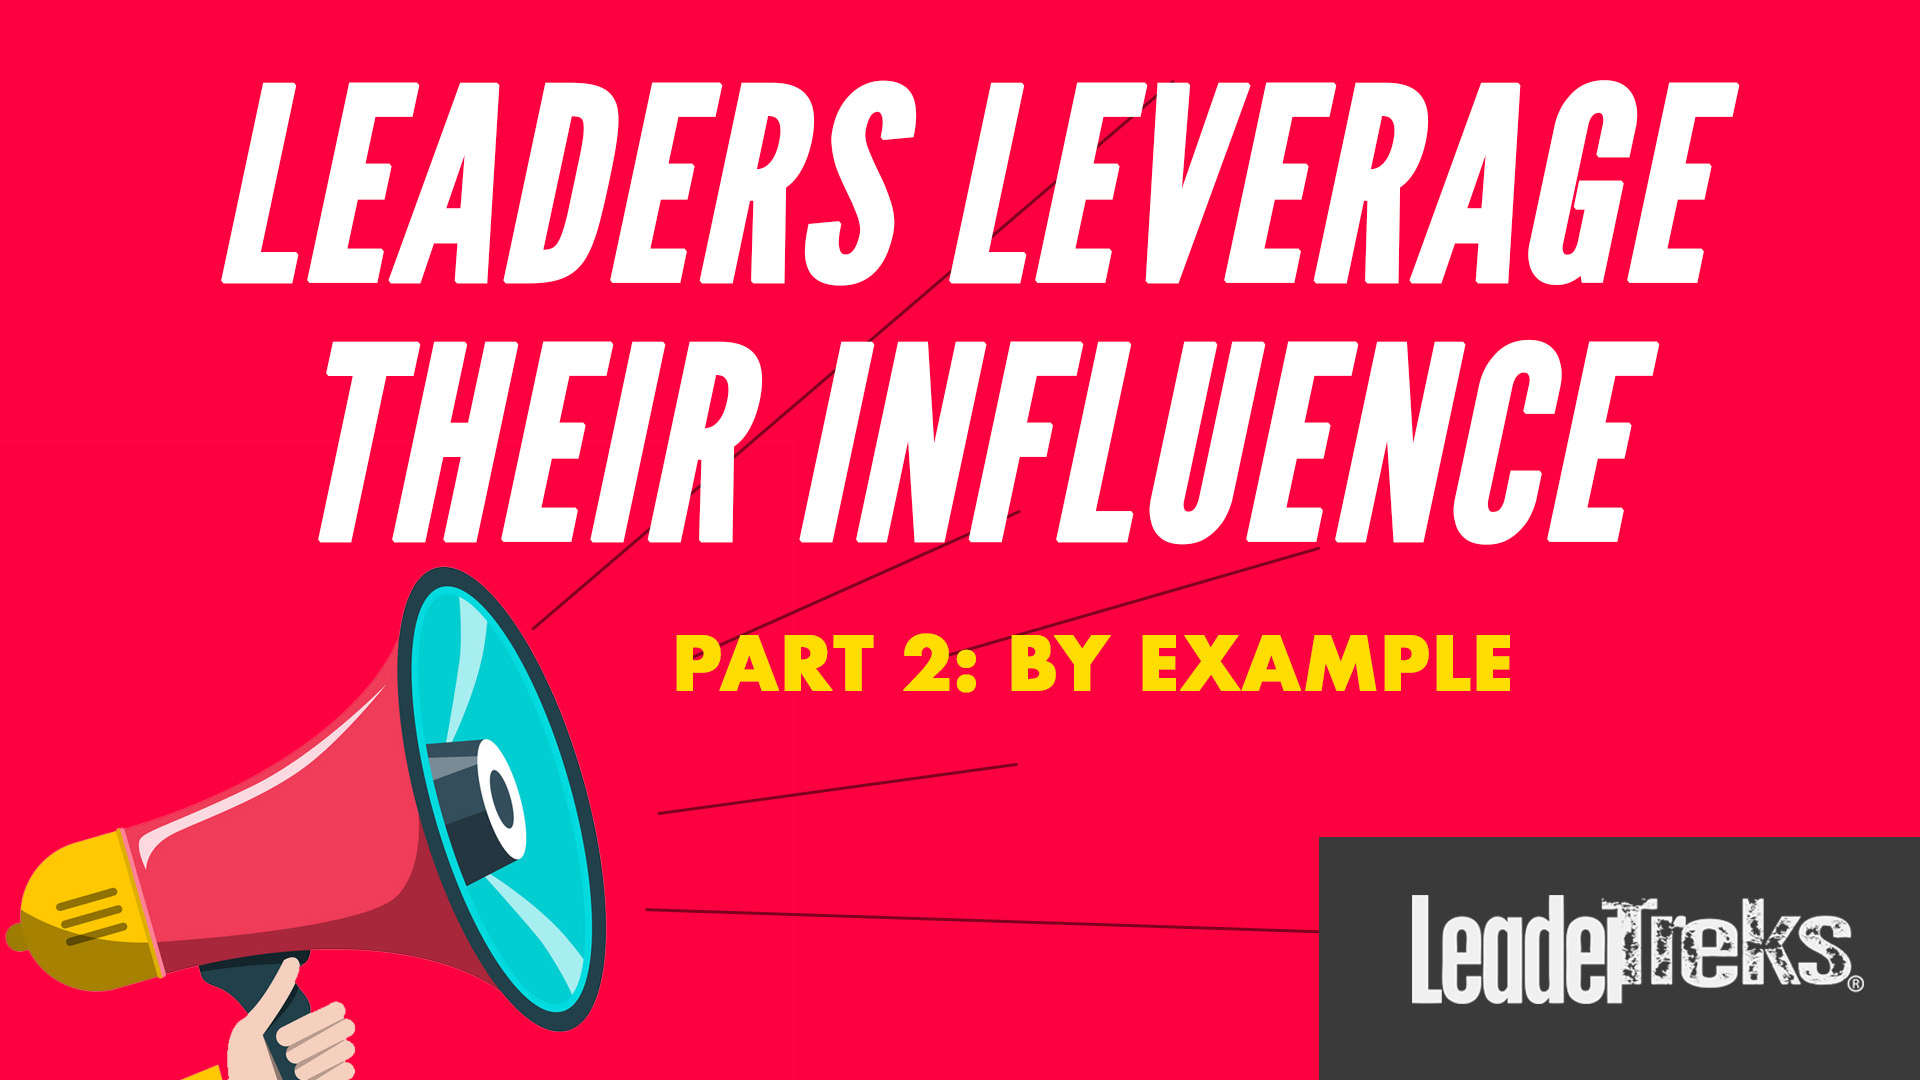 Student Leaders Leverage Their Influence: Part 2 By Example